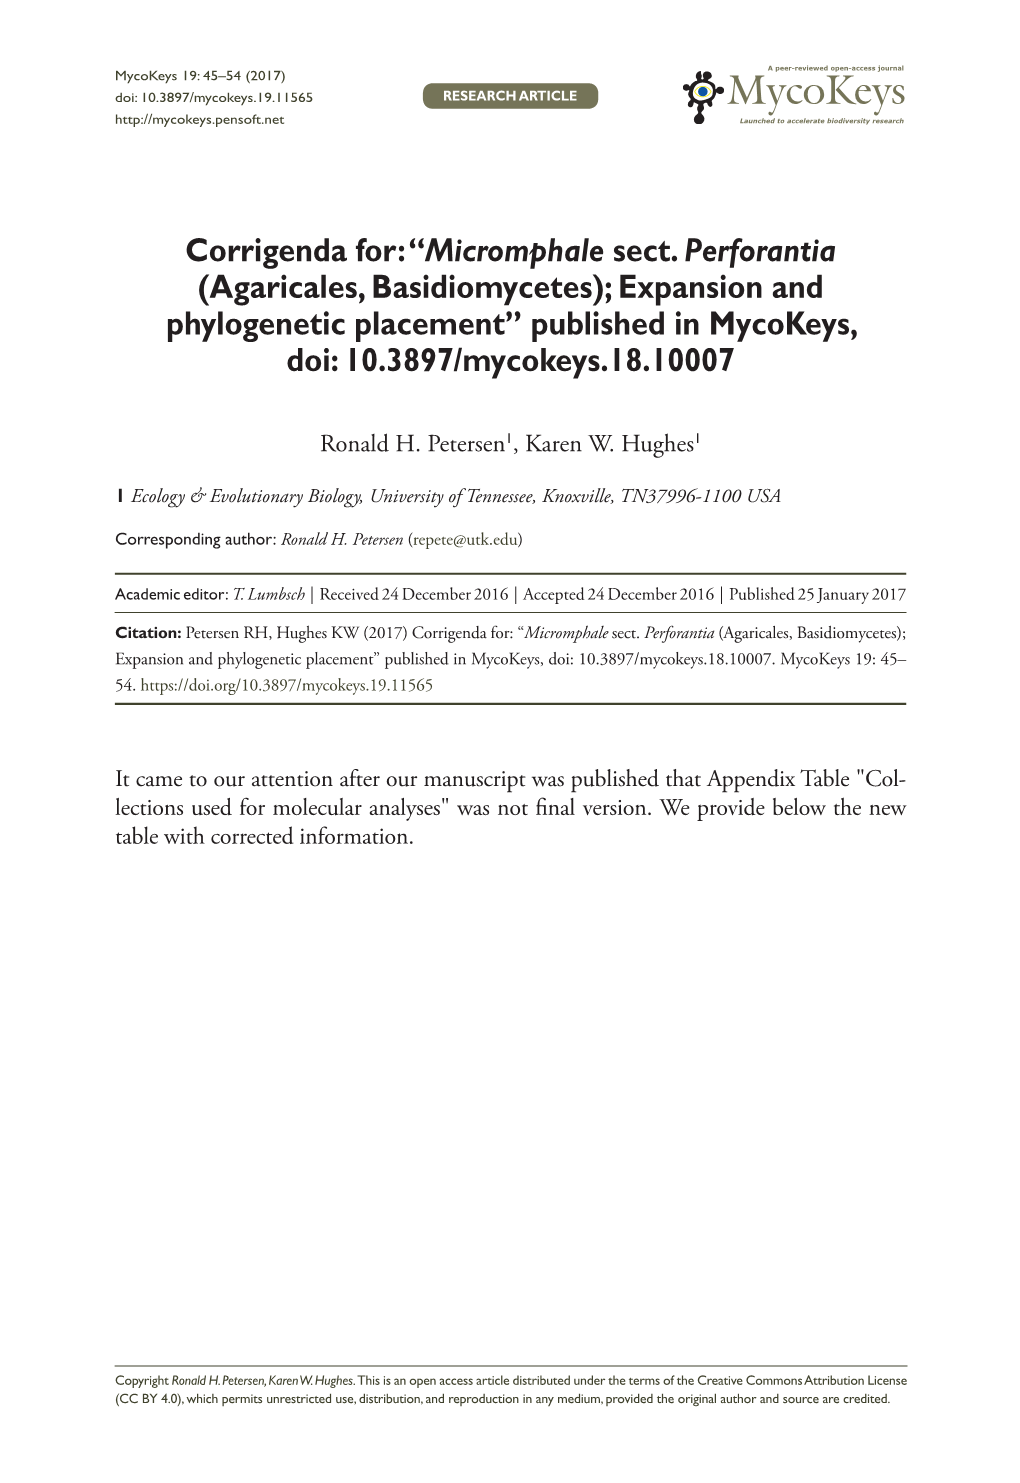 Micromphale Sect. Perforantia (Agaricales, Basidiomycetes); Expansion and Phylogenetic Placement” Published in Mycokeys, Doi: 10.3897/Mycokeys.18.10007